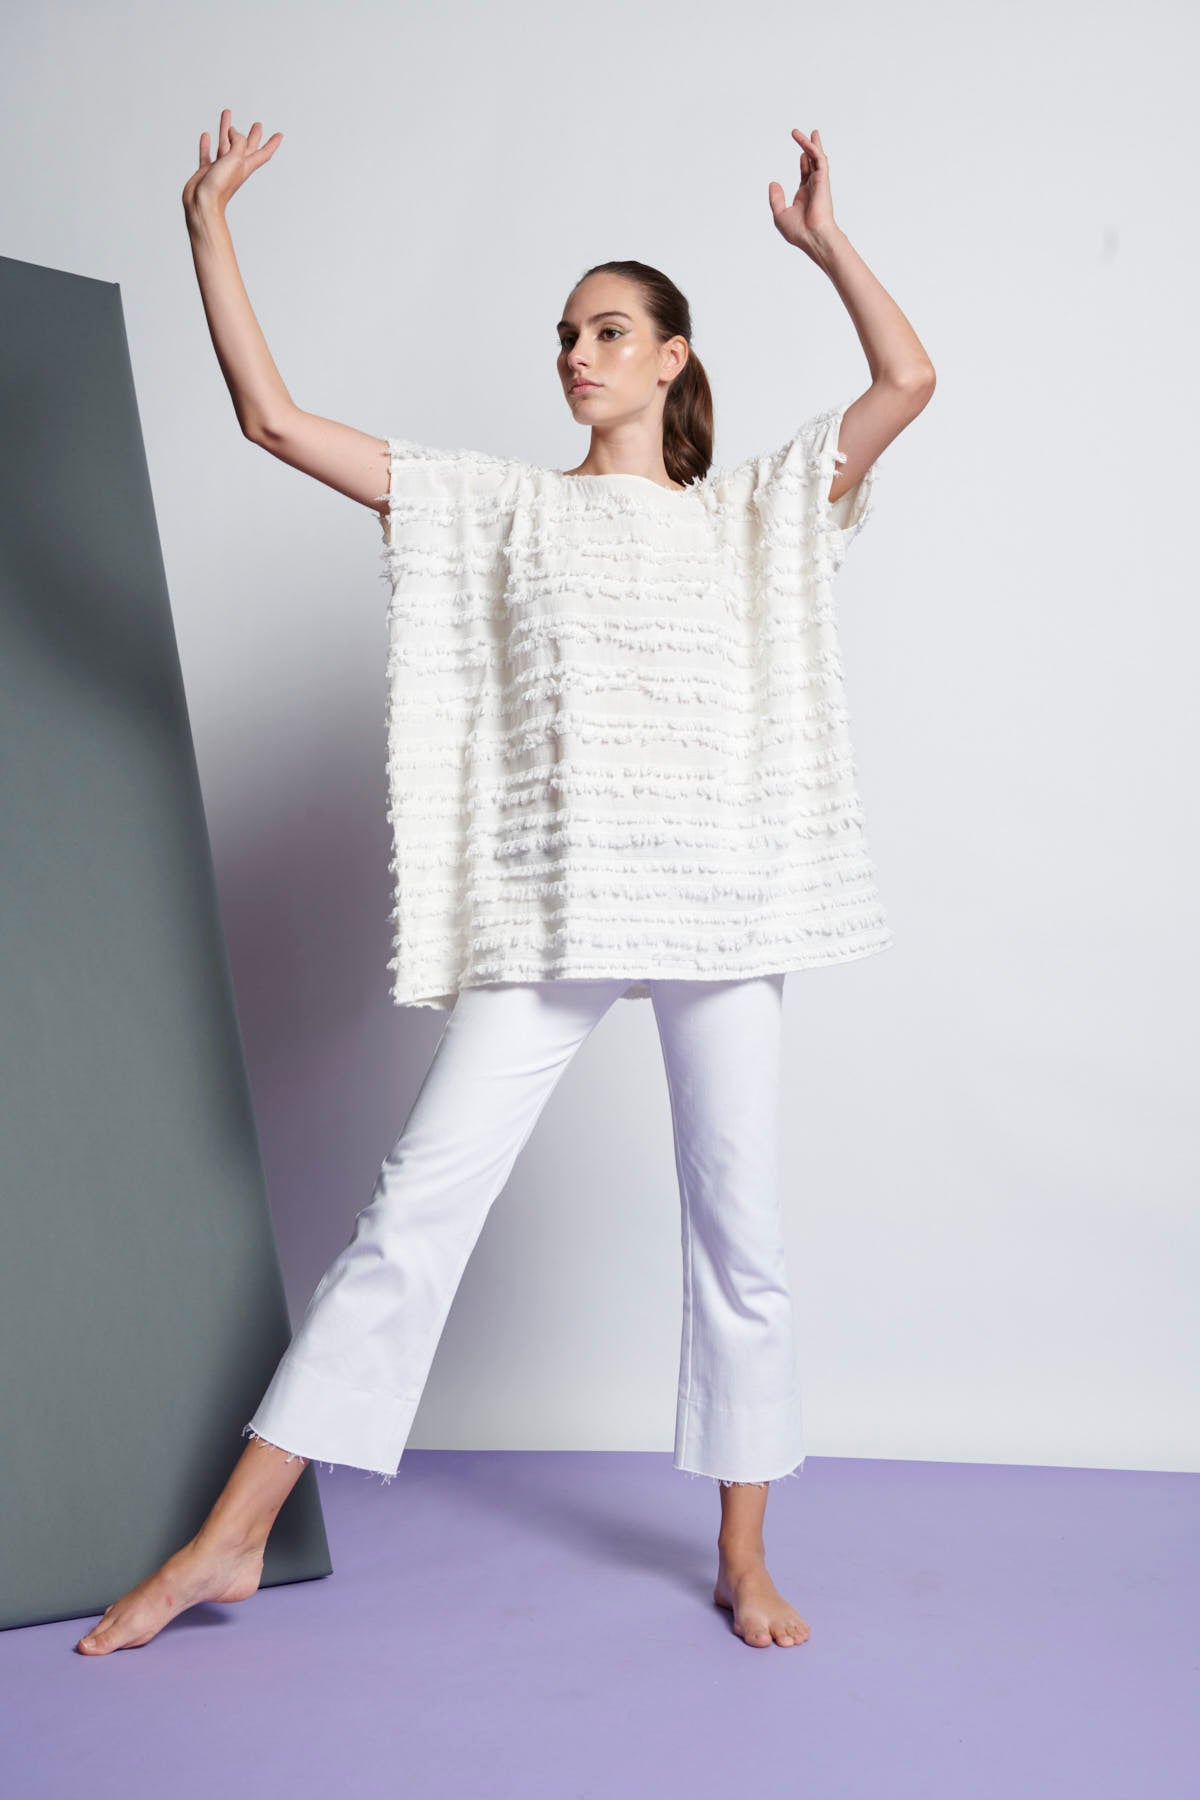 A white easy fit, square cut top made from cotton and linen with round neckline, short sleeves, and striped fringe fabric